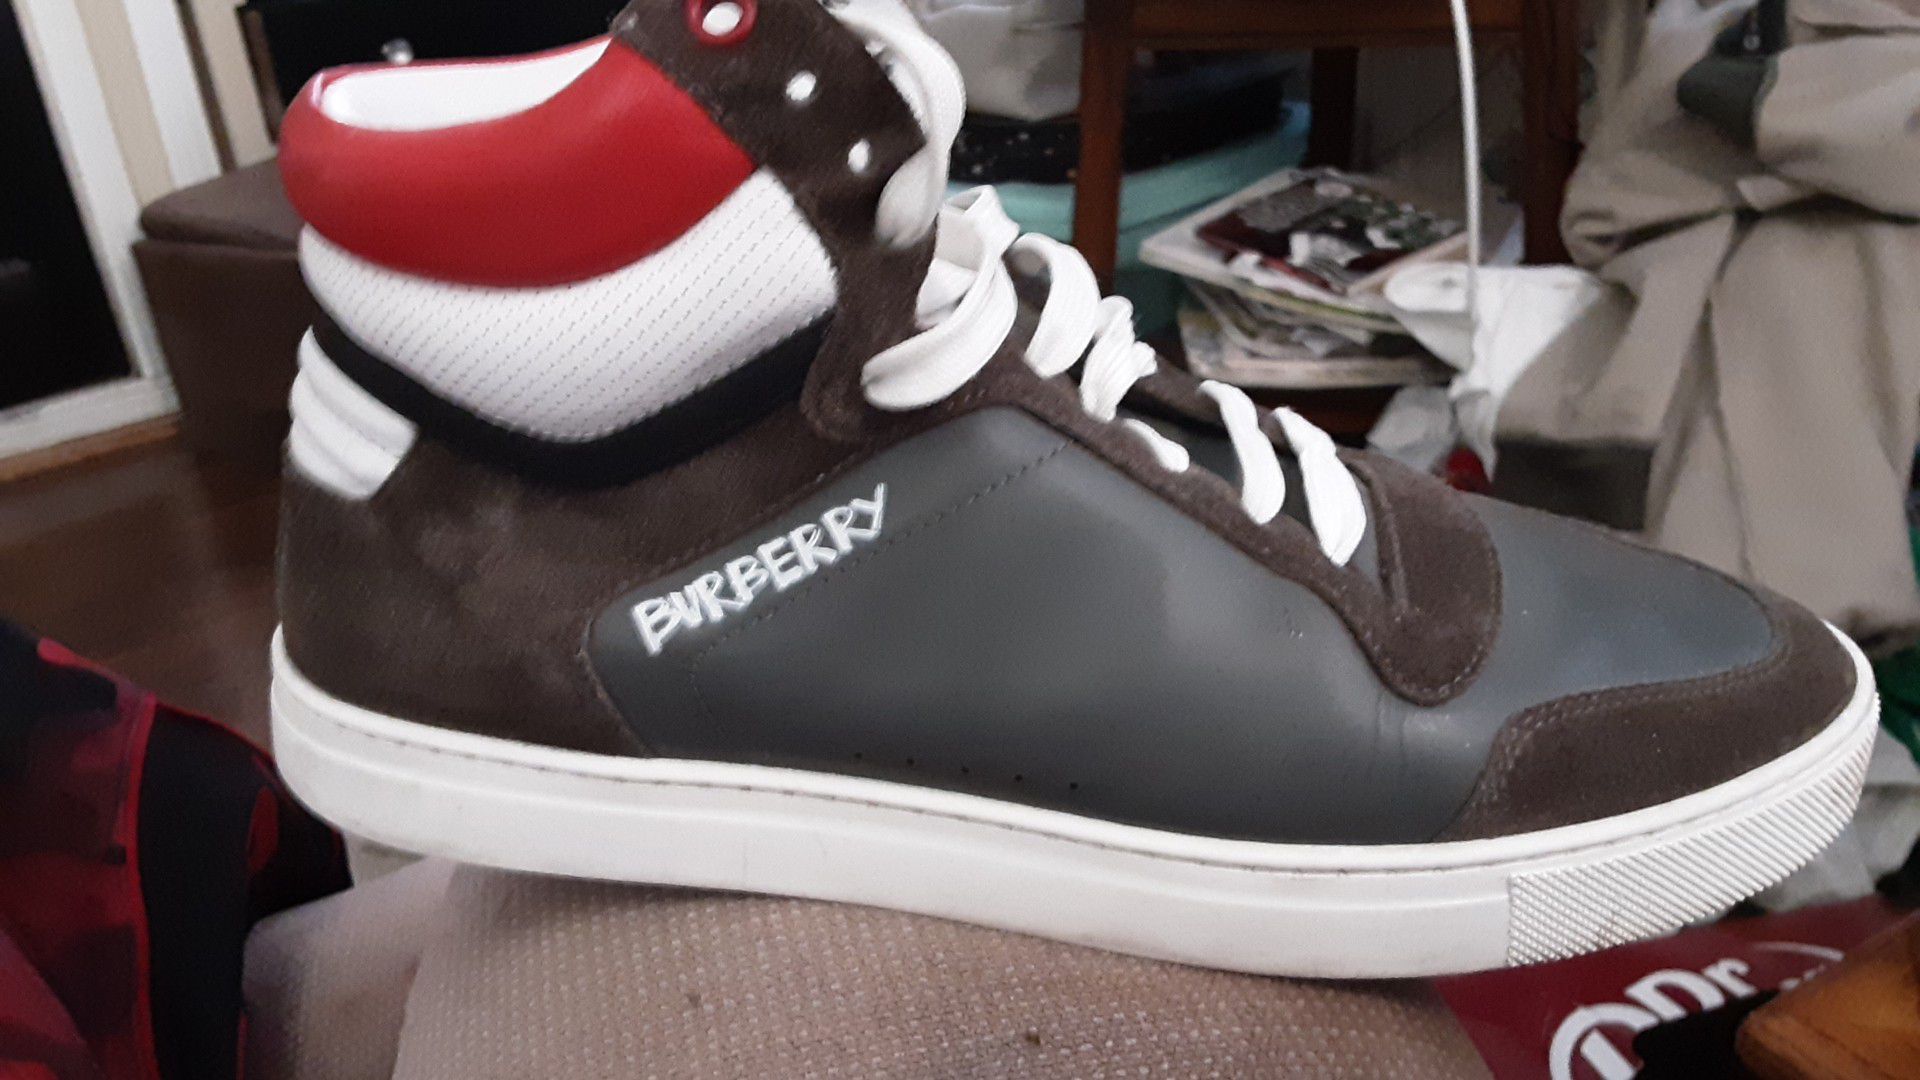 Burberry high tops size 40 (9 1/2)